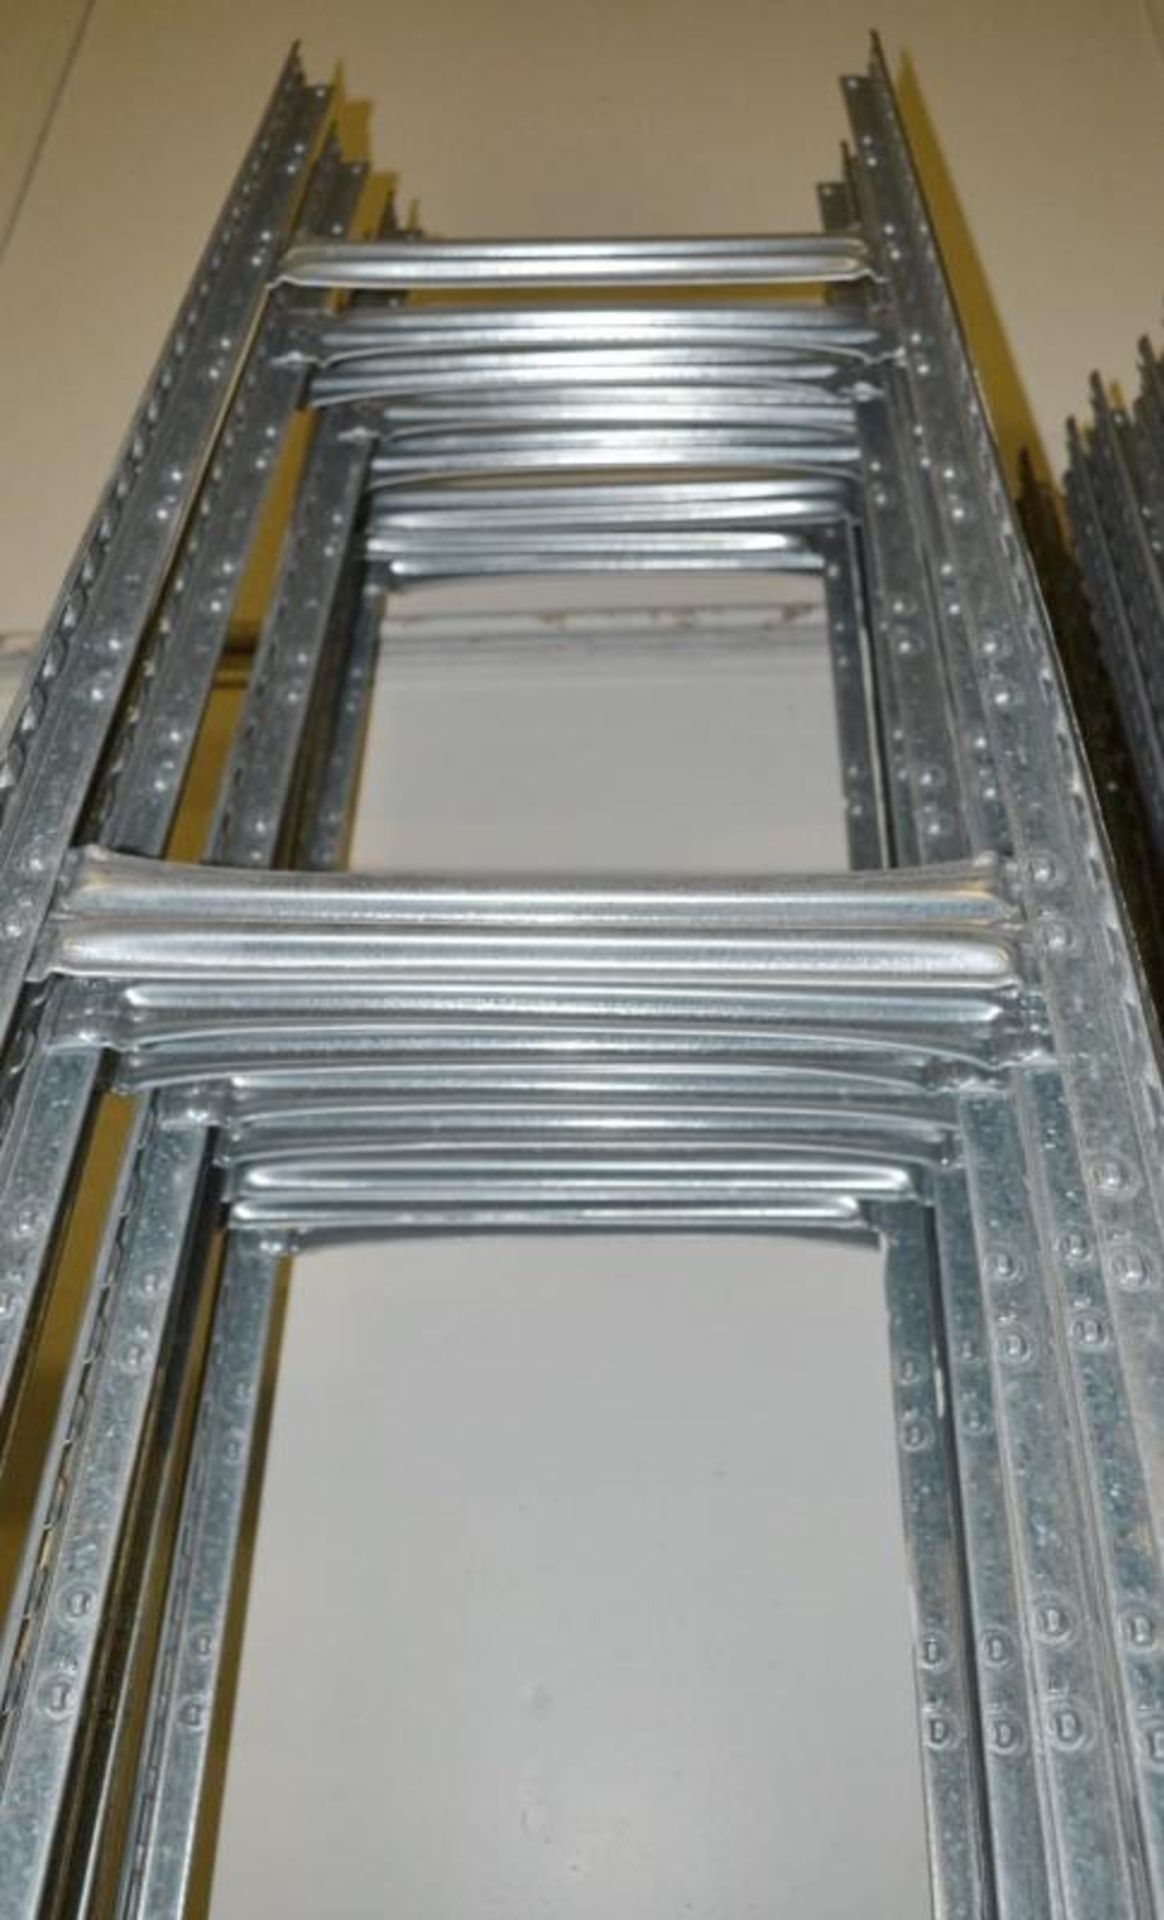 4 x Bays of Metalsistem Steel Modular Storage Shelving - Includes 29 Pieces - Recently Removed - Image 9 of 17